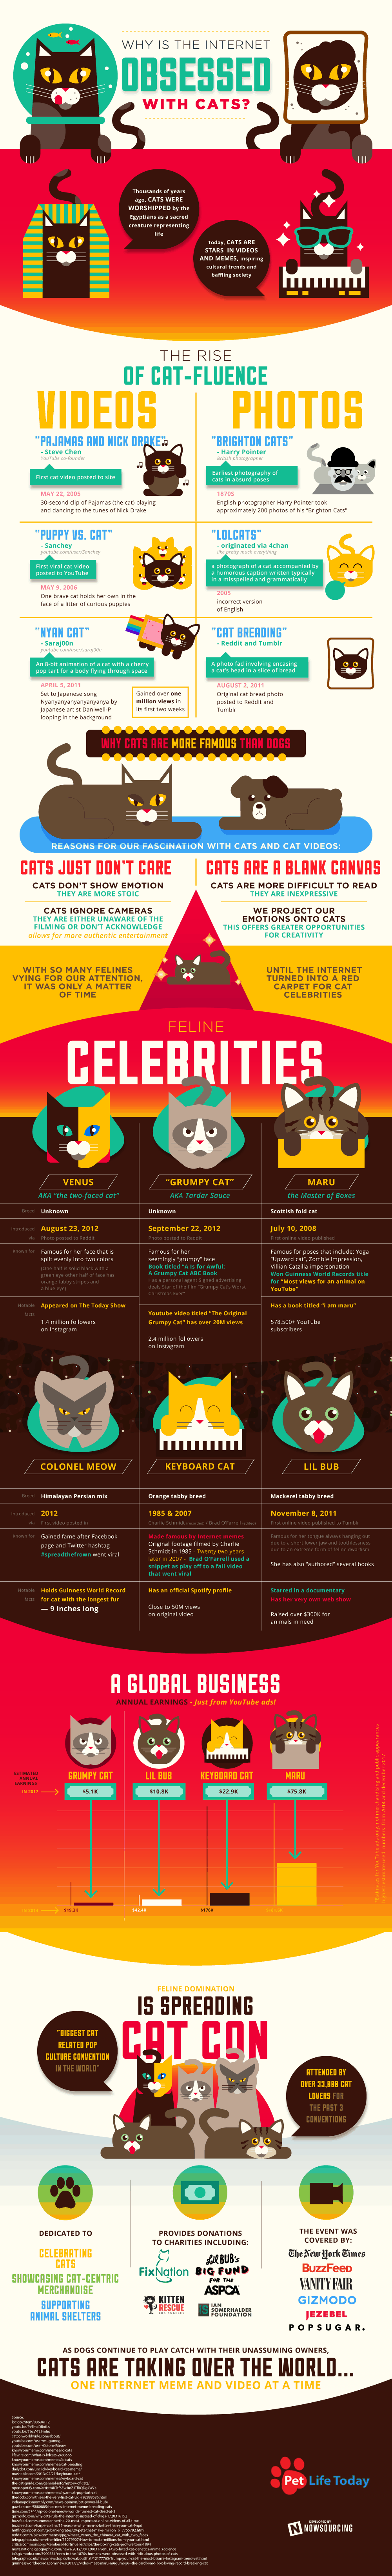 internet is obsessed with cats infographic